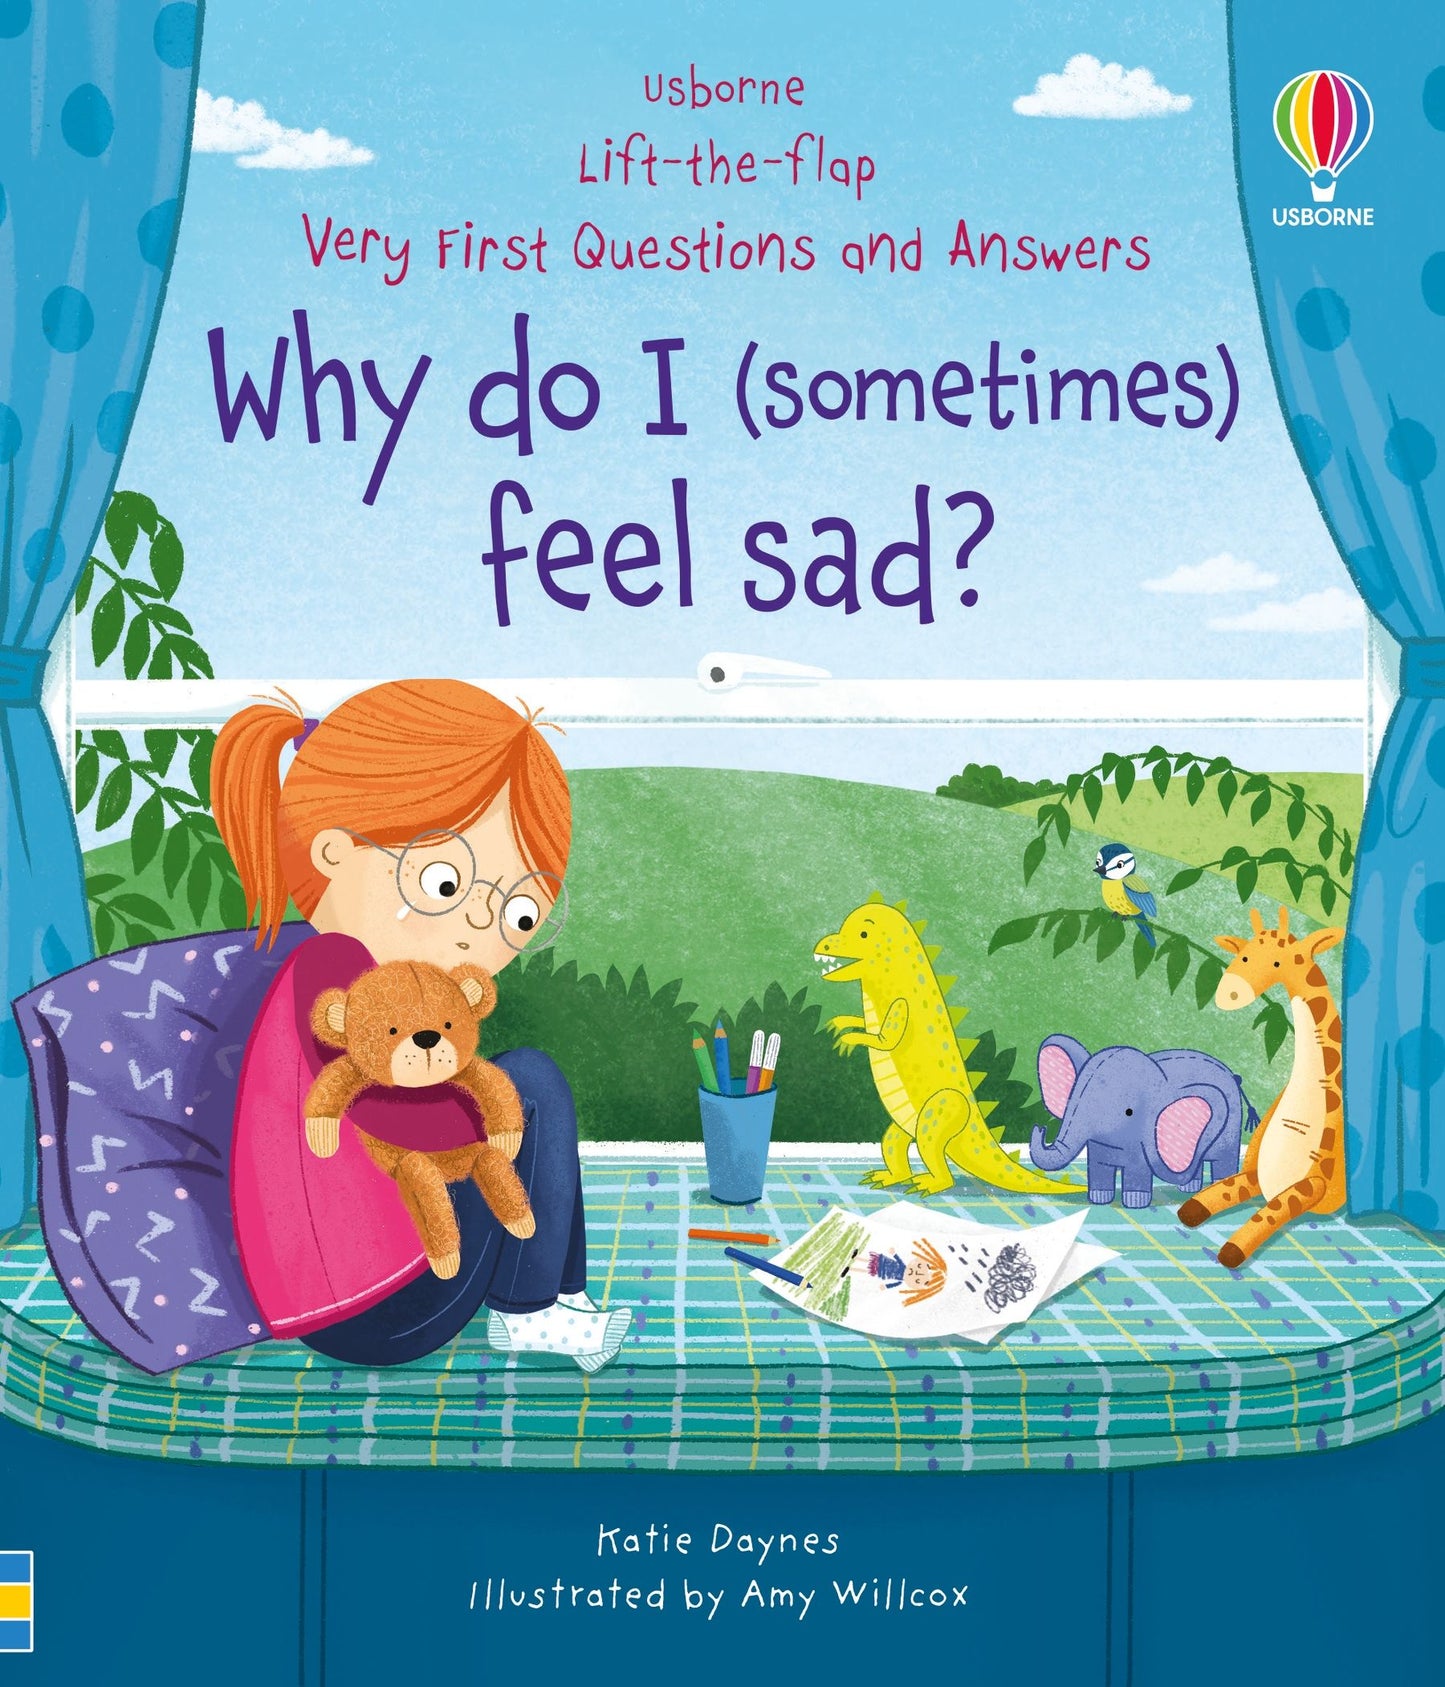 Lift-the-flap Very First Questions & Answers: Why do I (sometimes) feel sad?